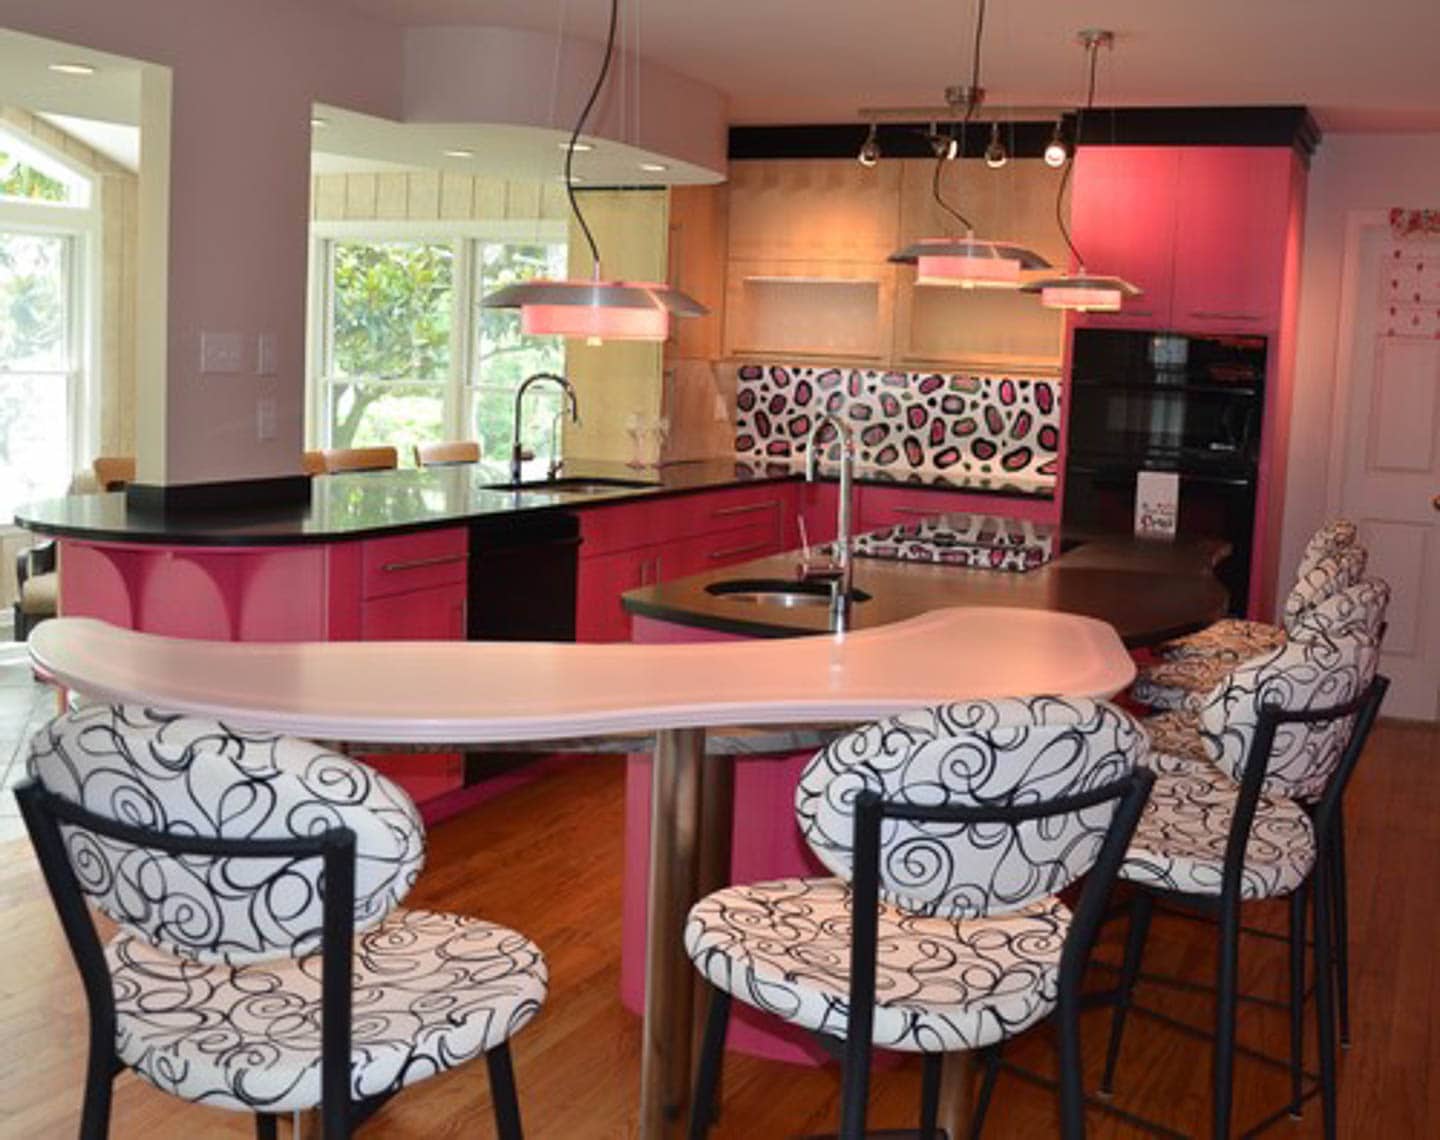 Eclectic kitchen with pink cabinets, black countertops and a white, pink and black leopard print backsplash